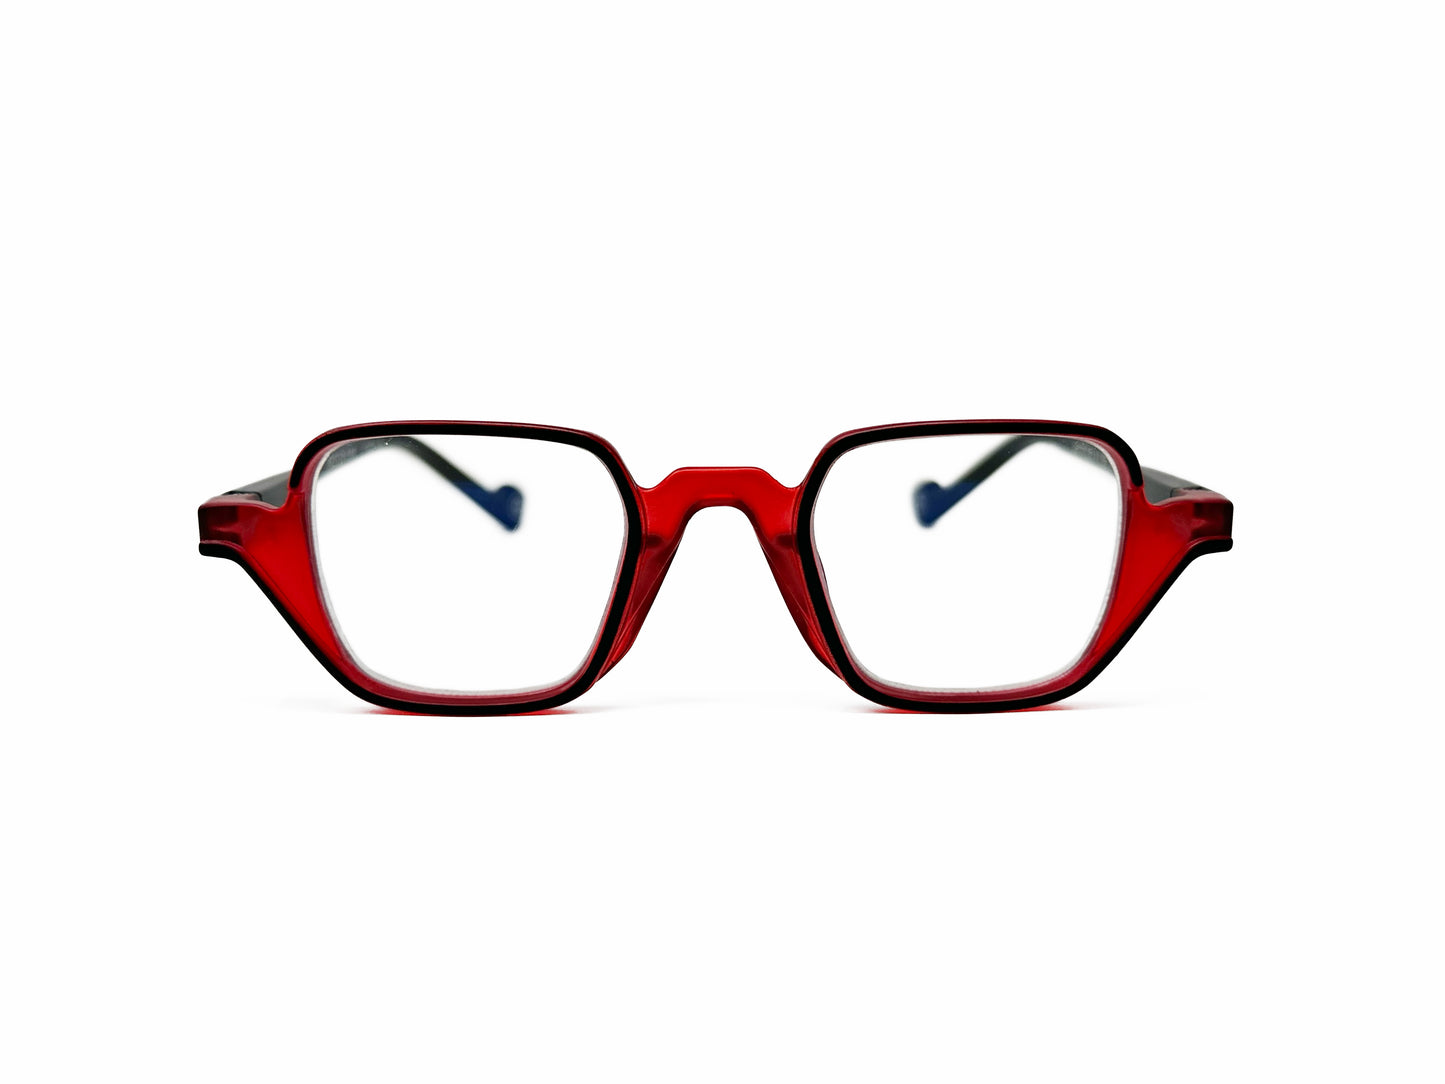 Aptica square acetate reader. Model: Lector. Color: Royal Red. Front view.